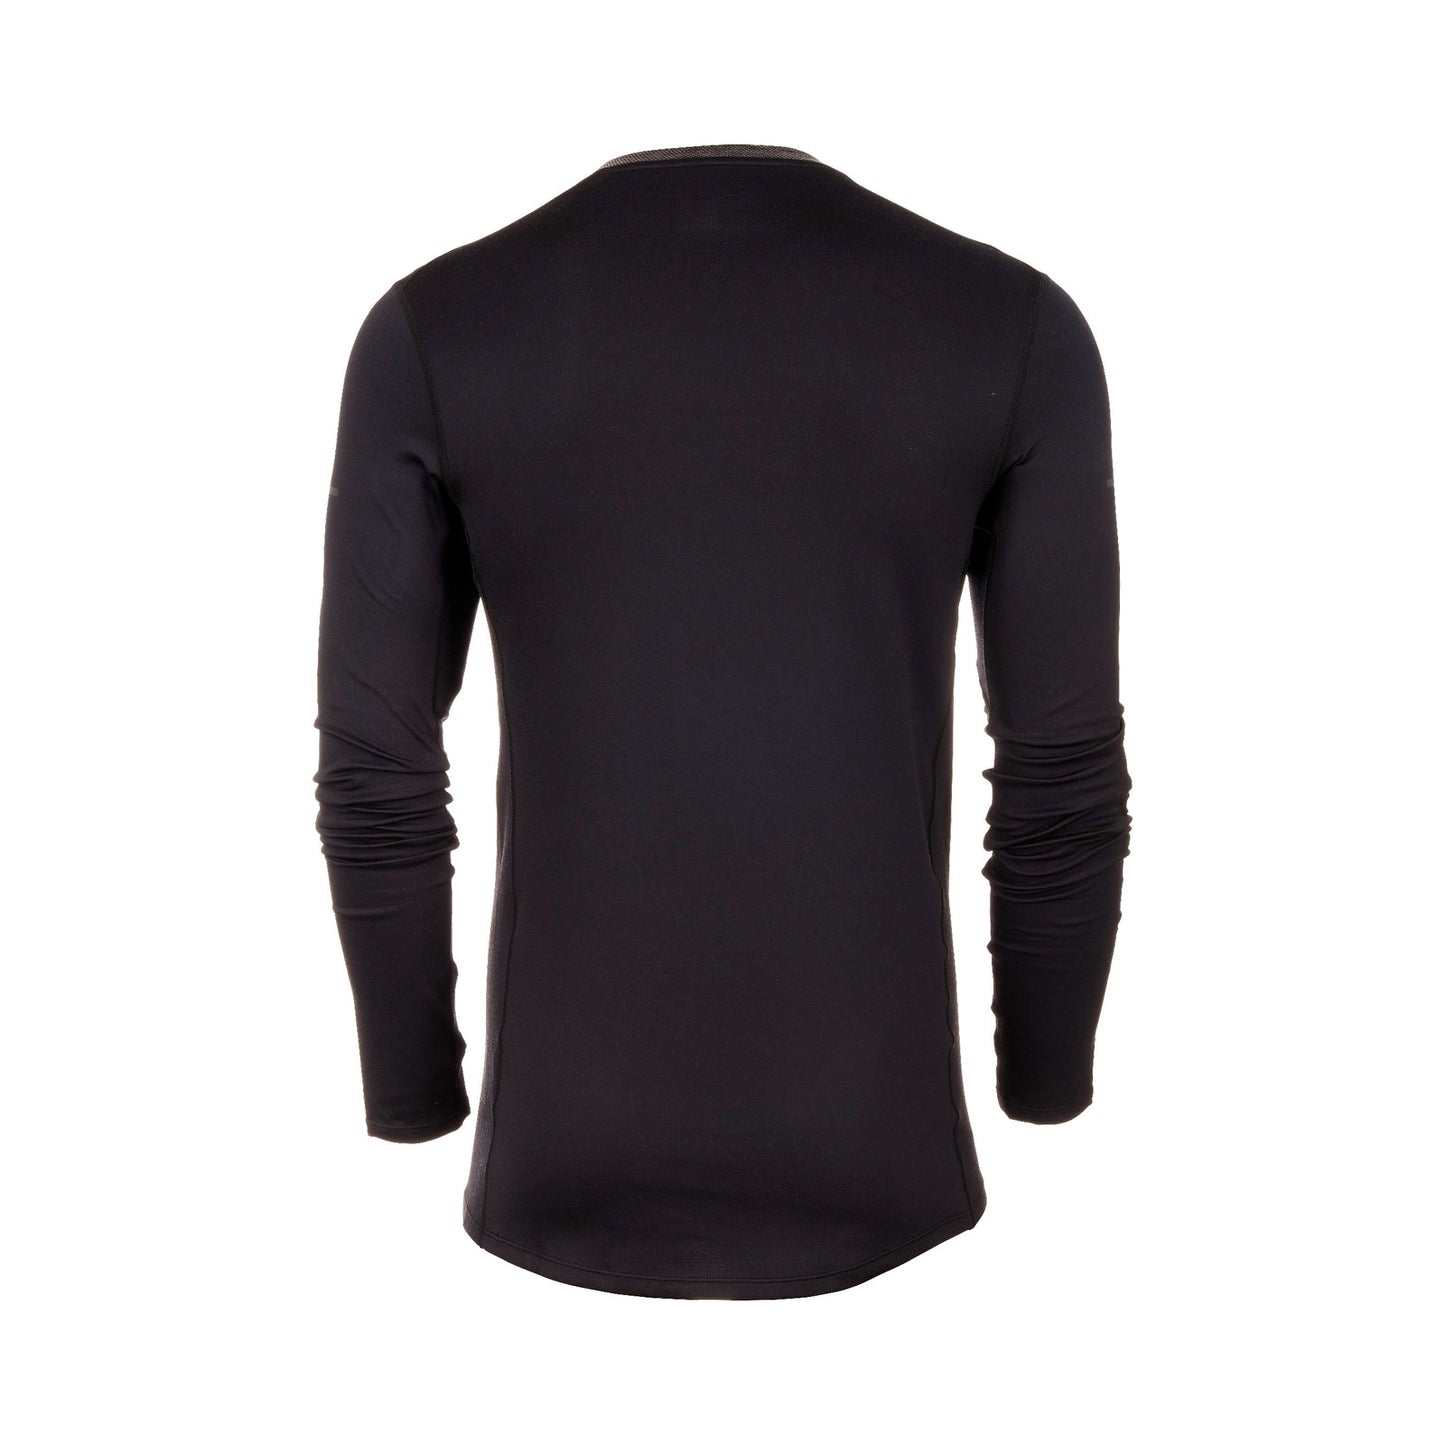 Men's Breath Thermo Long Sleeve Top - Black